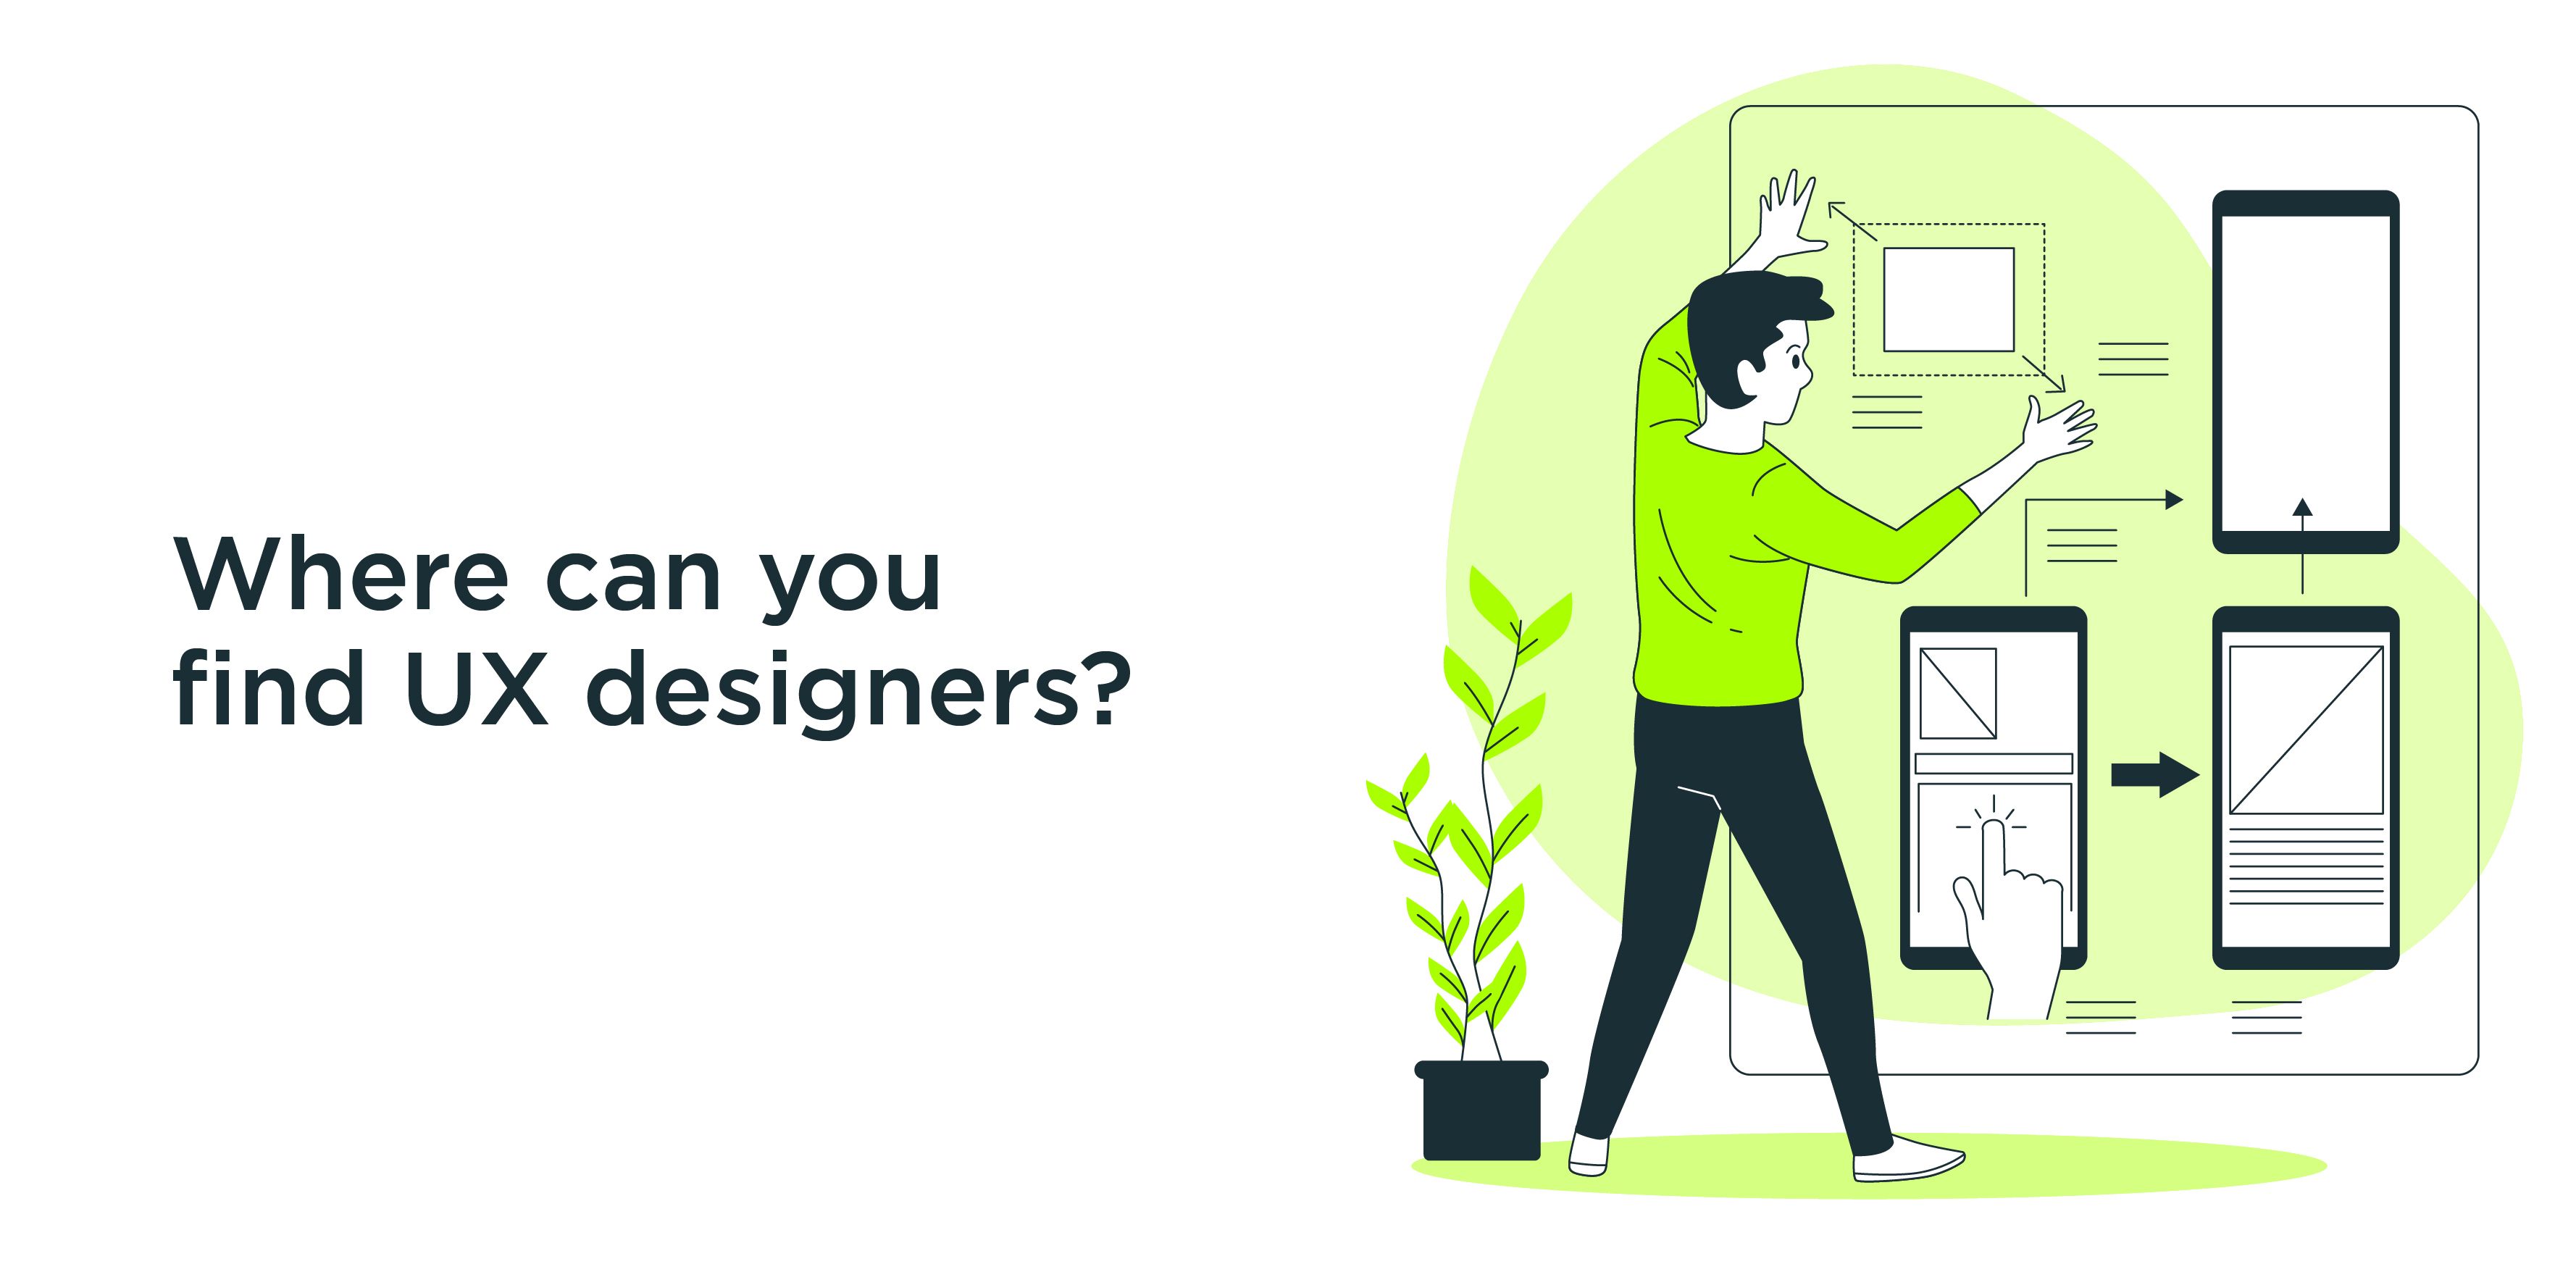 Where can you find UX designers?